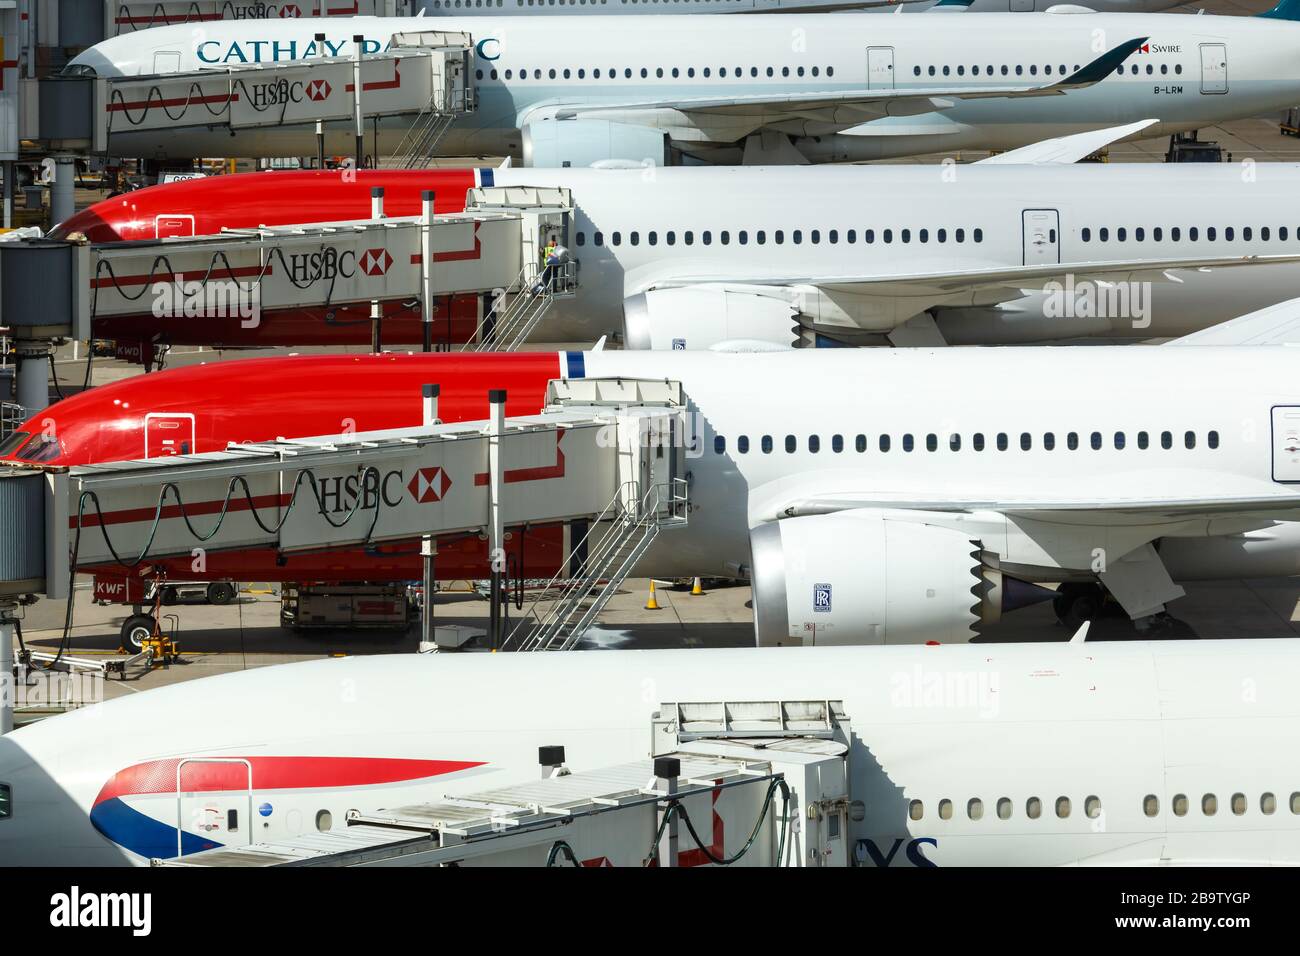 Gatwick, United Kingdom – July 31, 2018: Airplanes aircraft types symbolic photo at London Gatwick airport (LGW) in the United Kingdom. Stock Photo